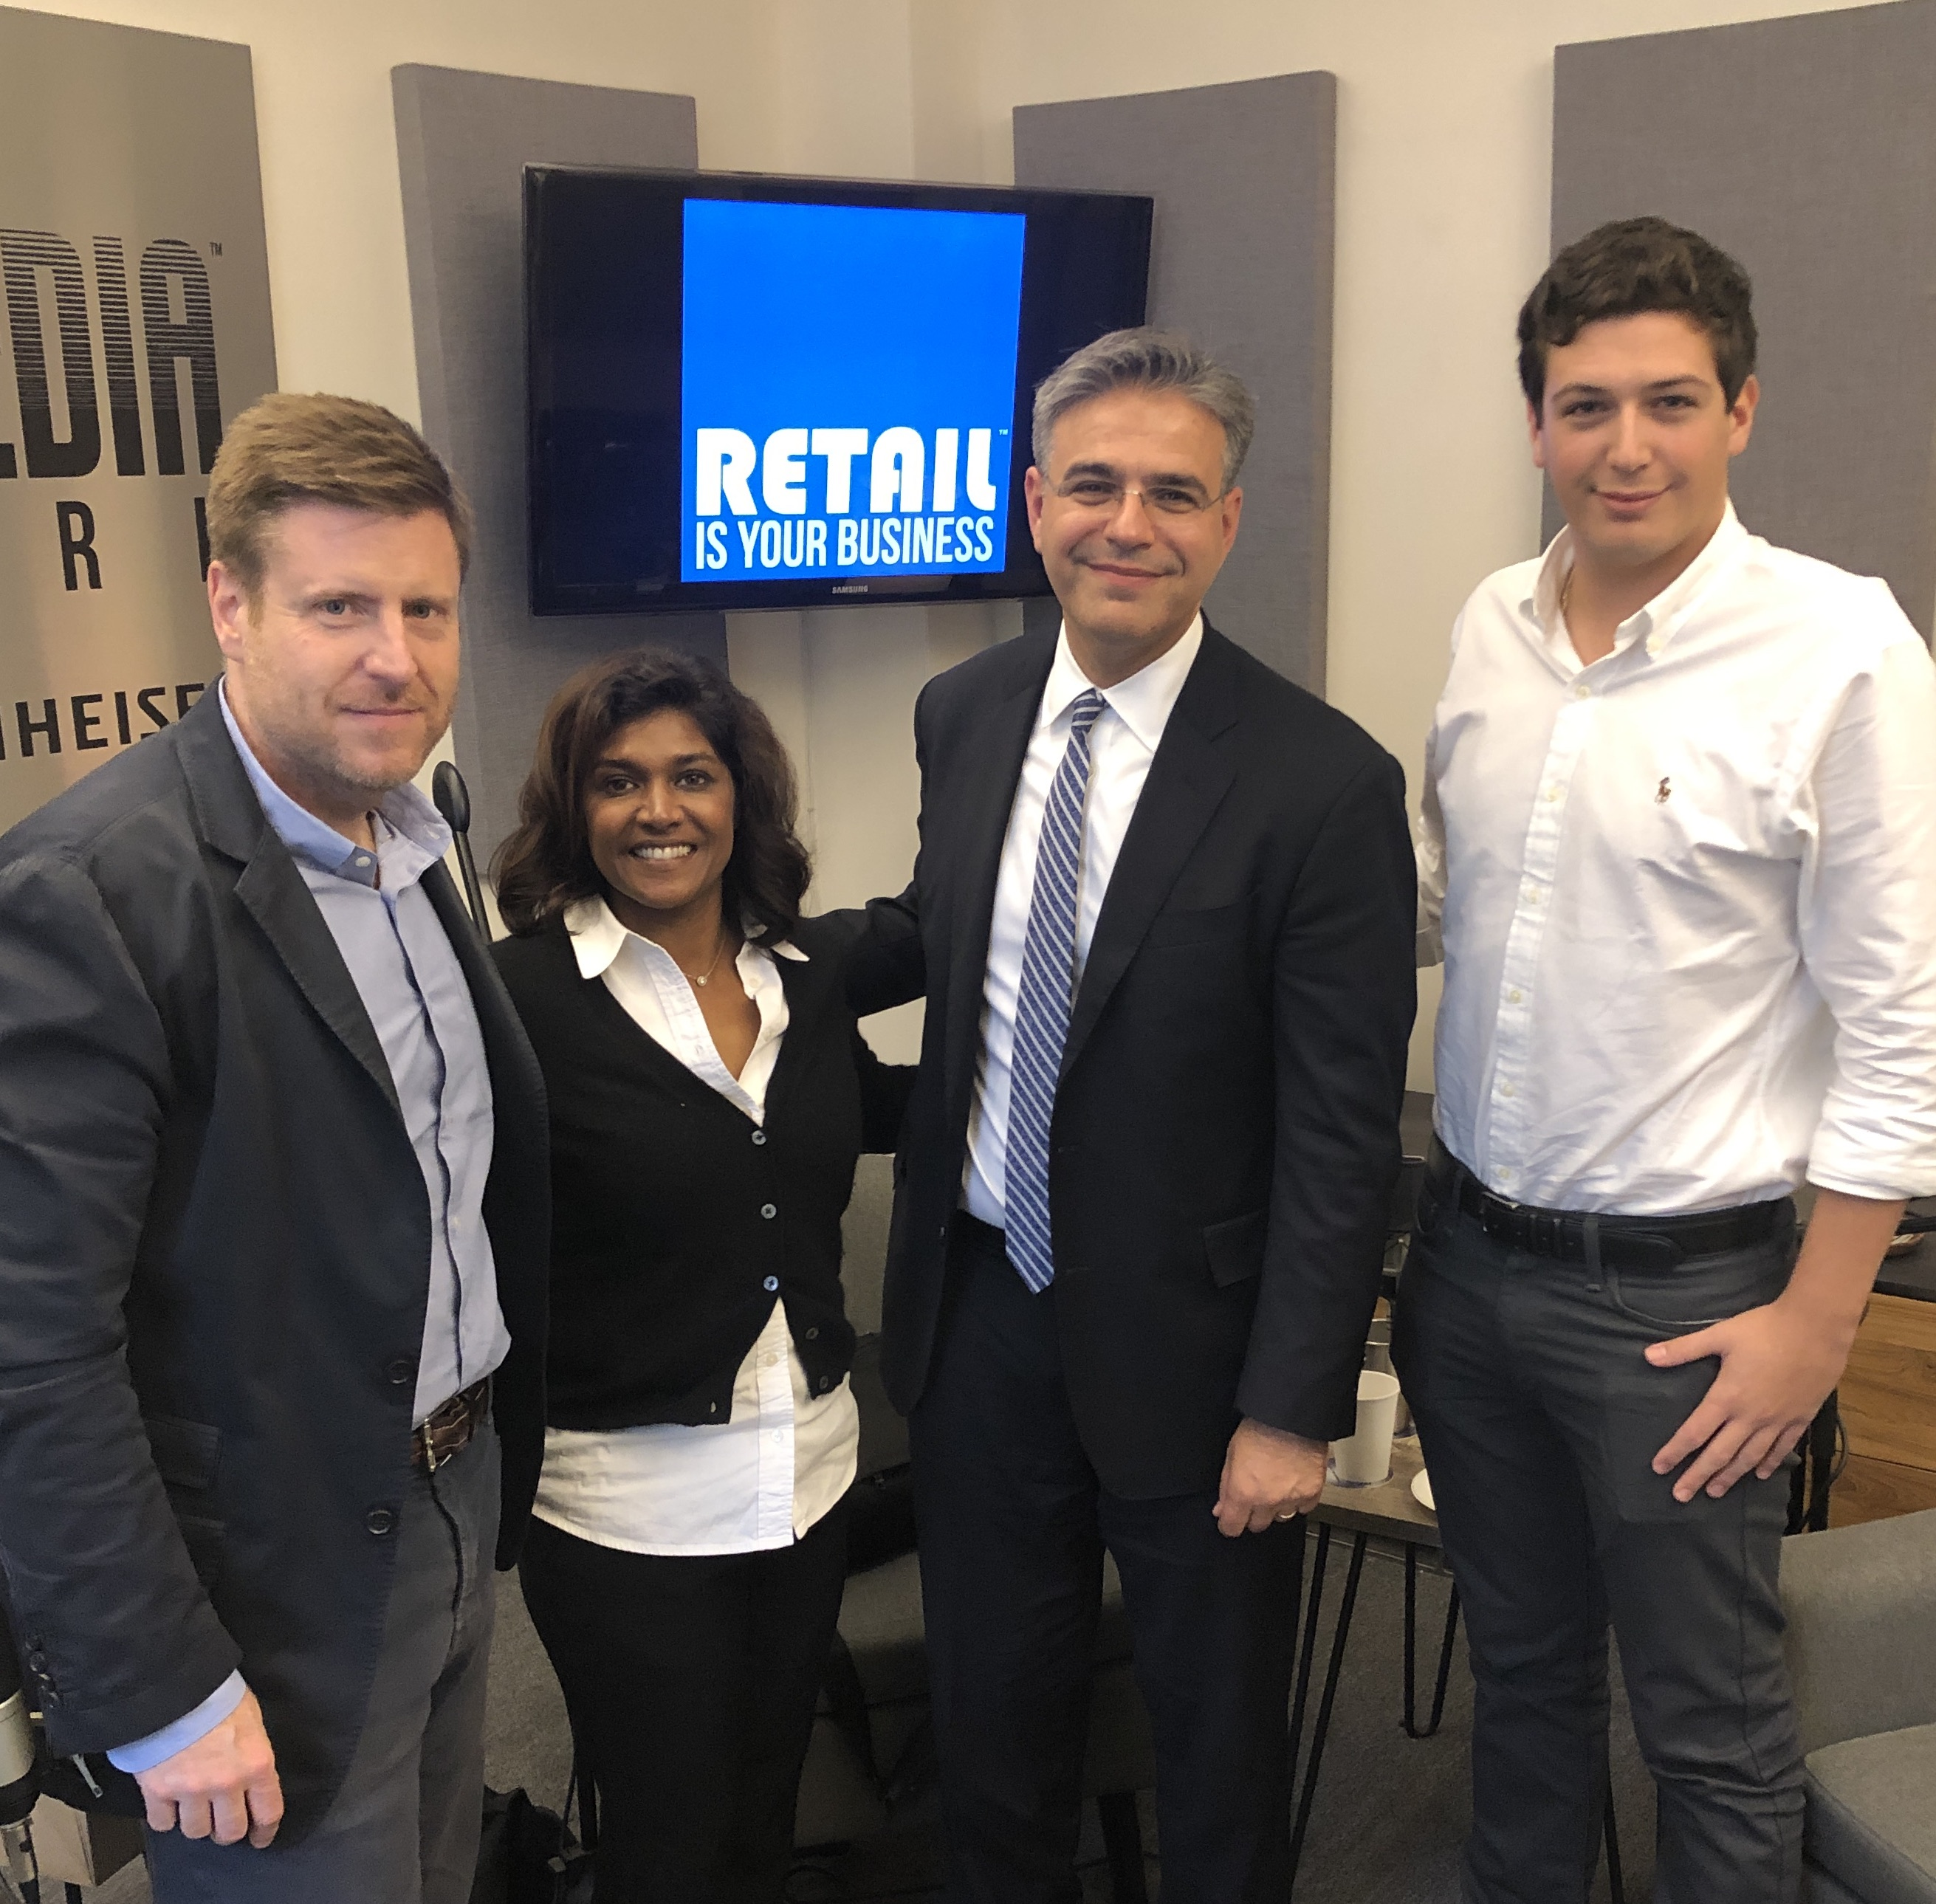 Corey Shuster and Matthew Bauer -  Madison Avenue: The Past, Present, and Future of Retail